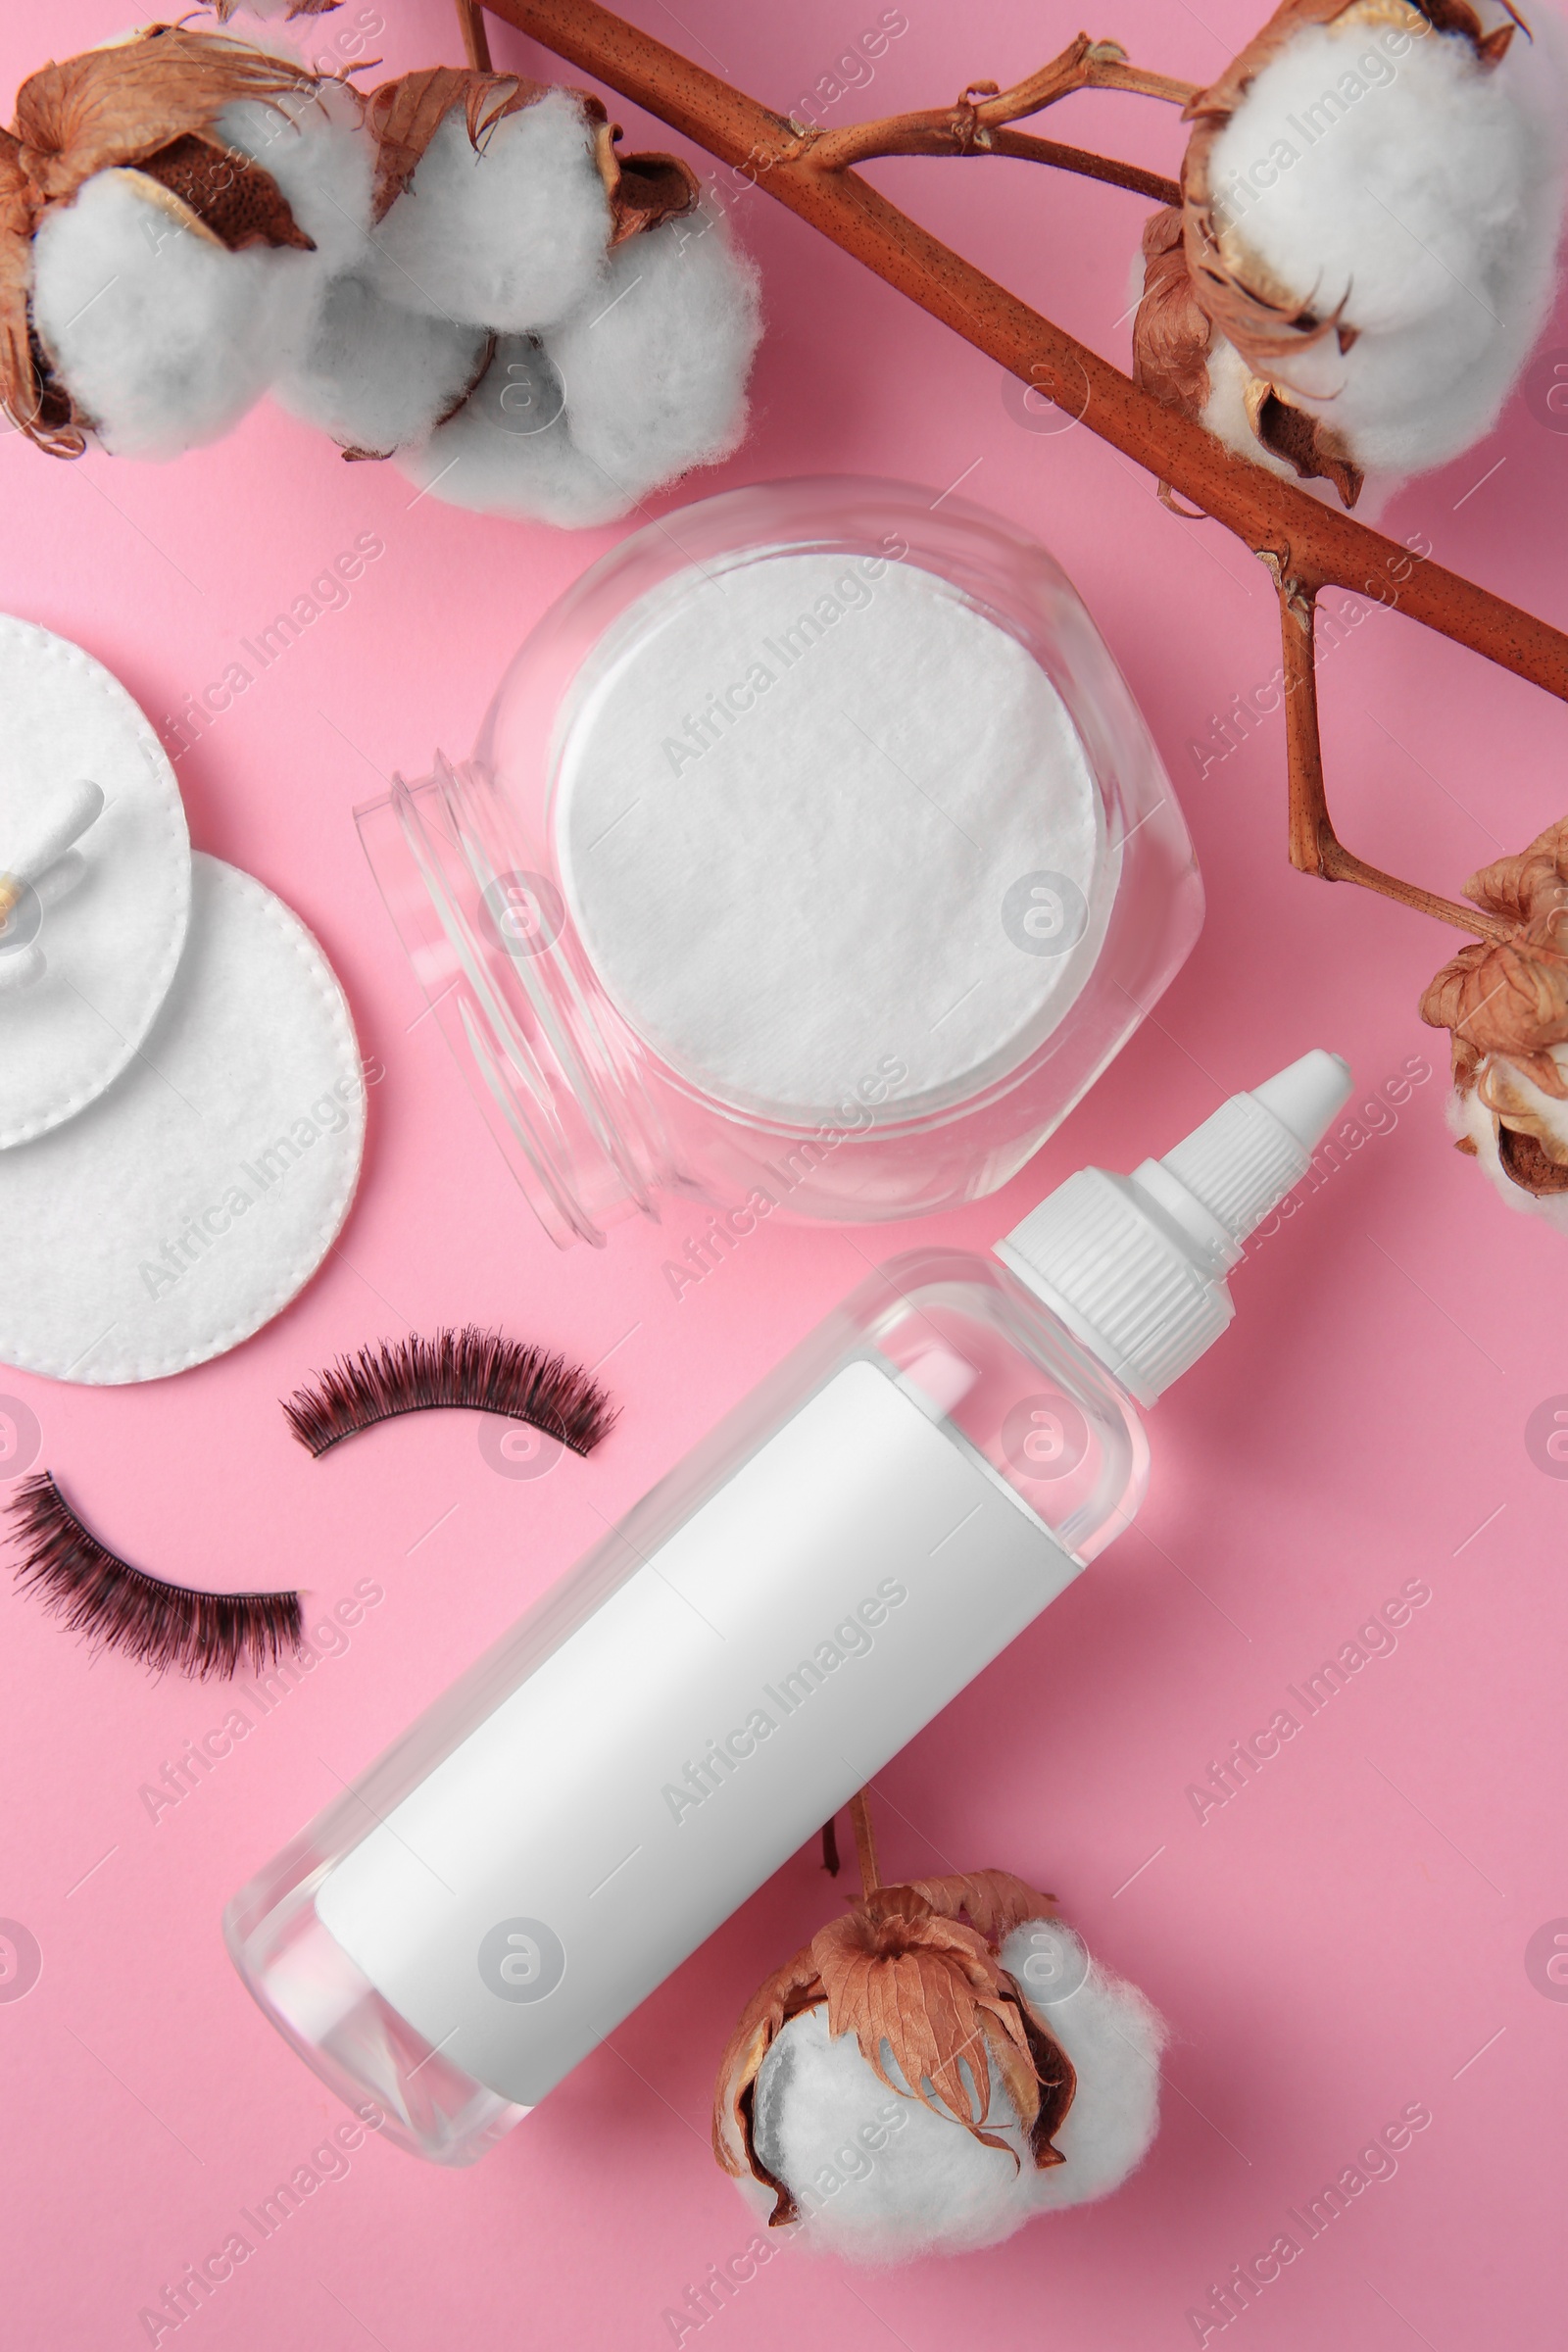 Photo of Bottle of makeup remover, cotton flowers, pads and false eyelashes on pink background, flat lay